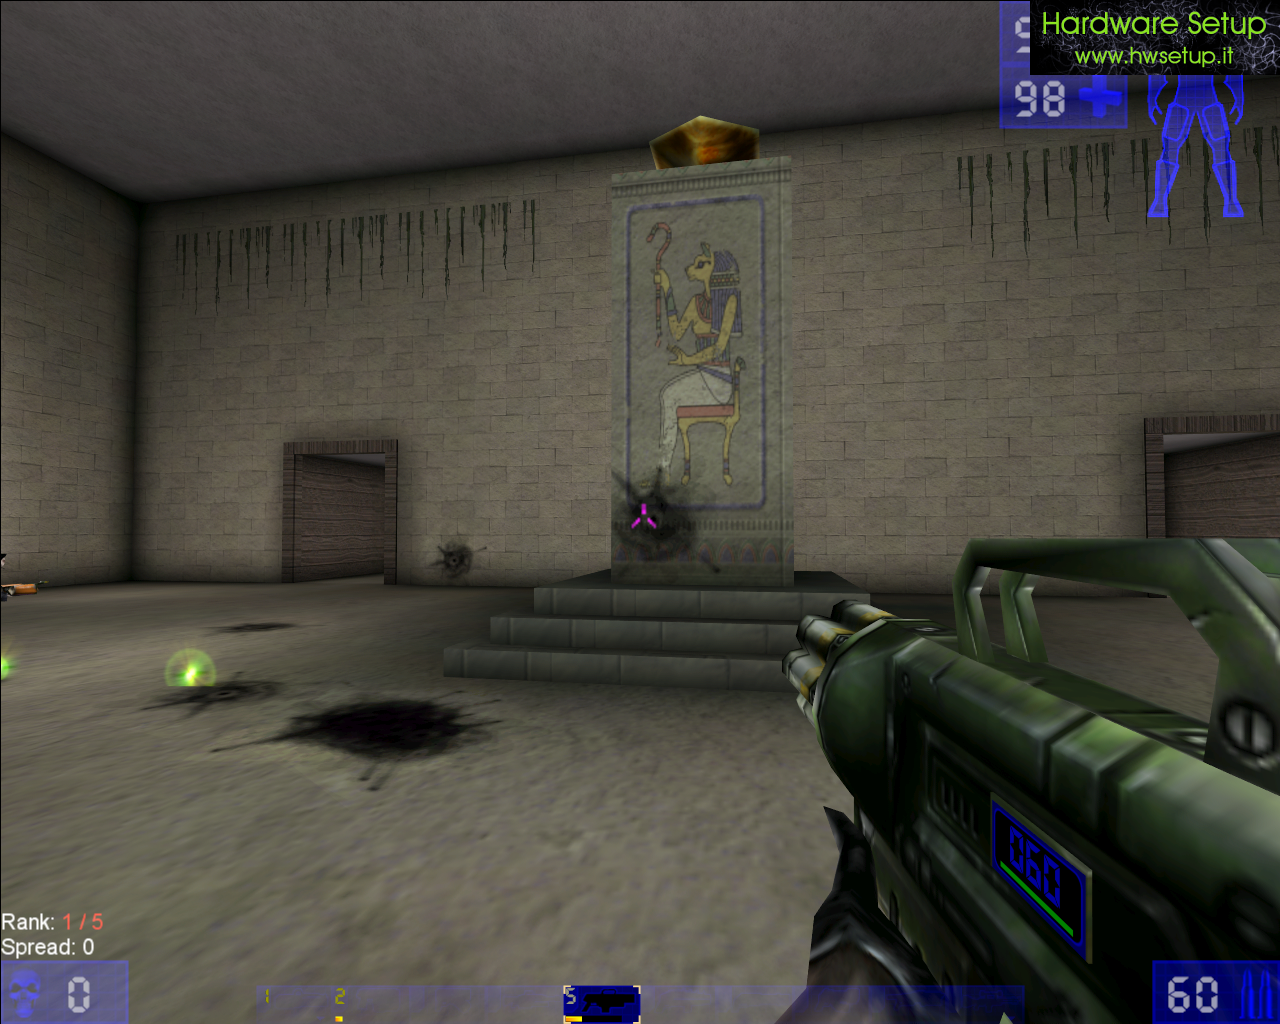 Media asset (photo, screenshot, or image in full size) related to contents posted at 3dfxzone.it | Image Name: unreal-tournament-3dfx-voodoo5-6000.png